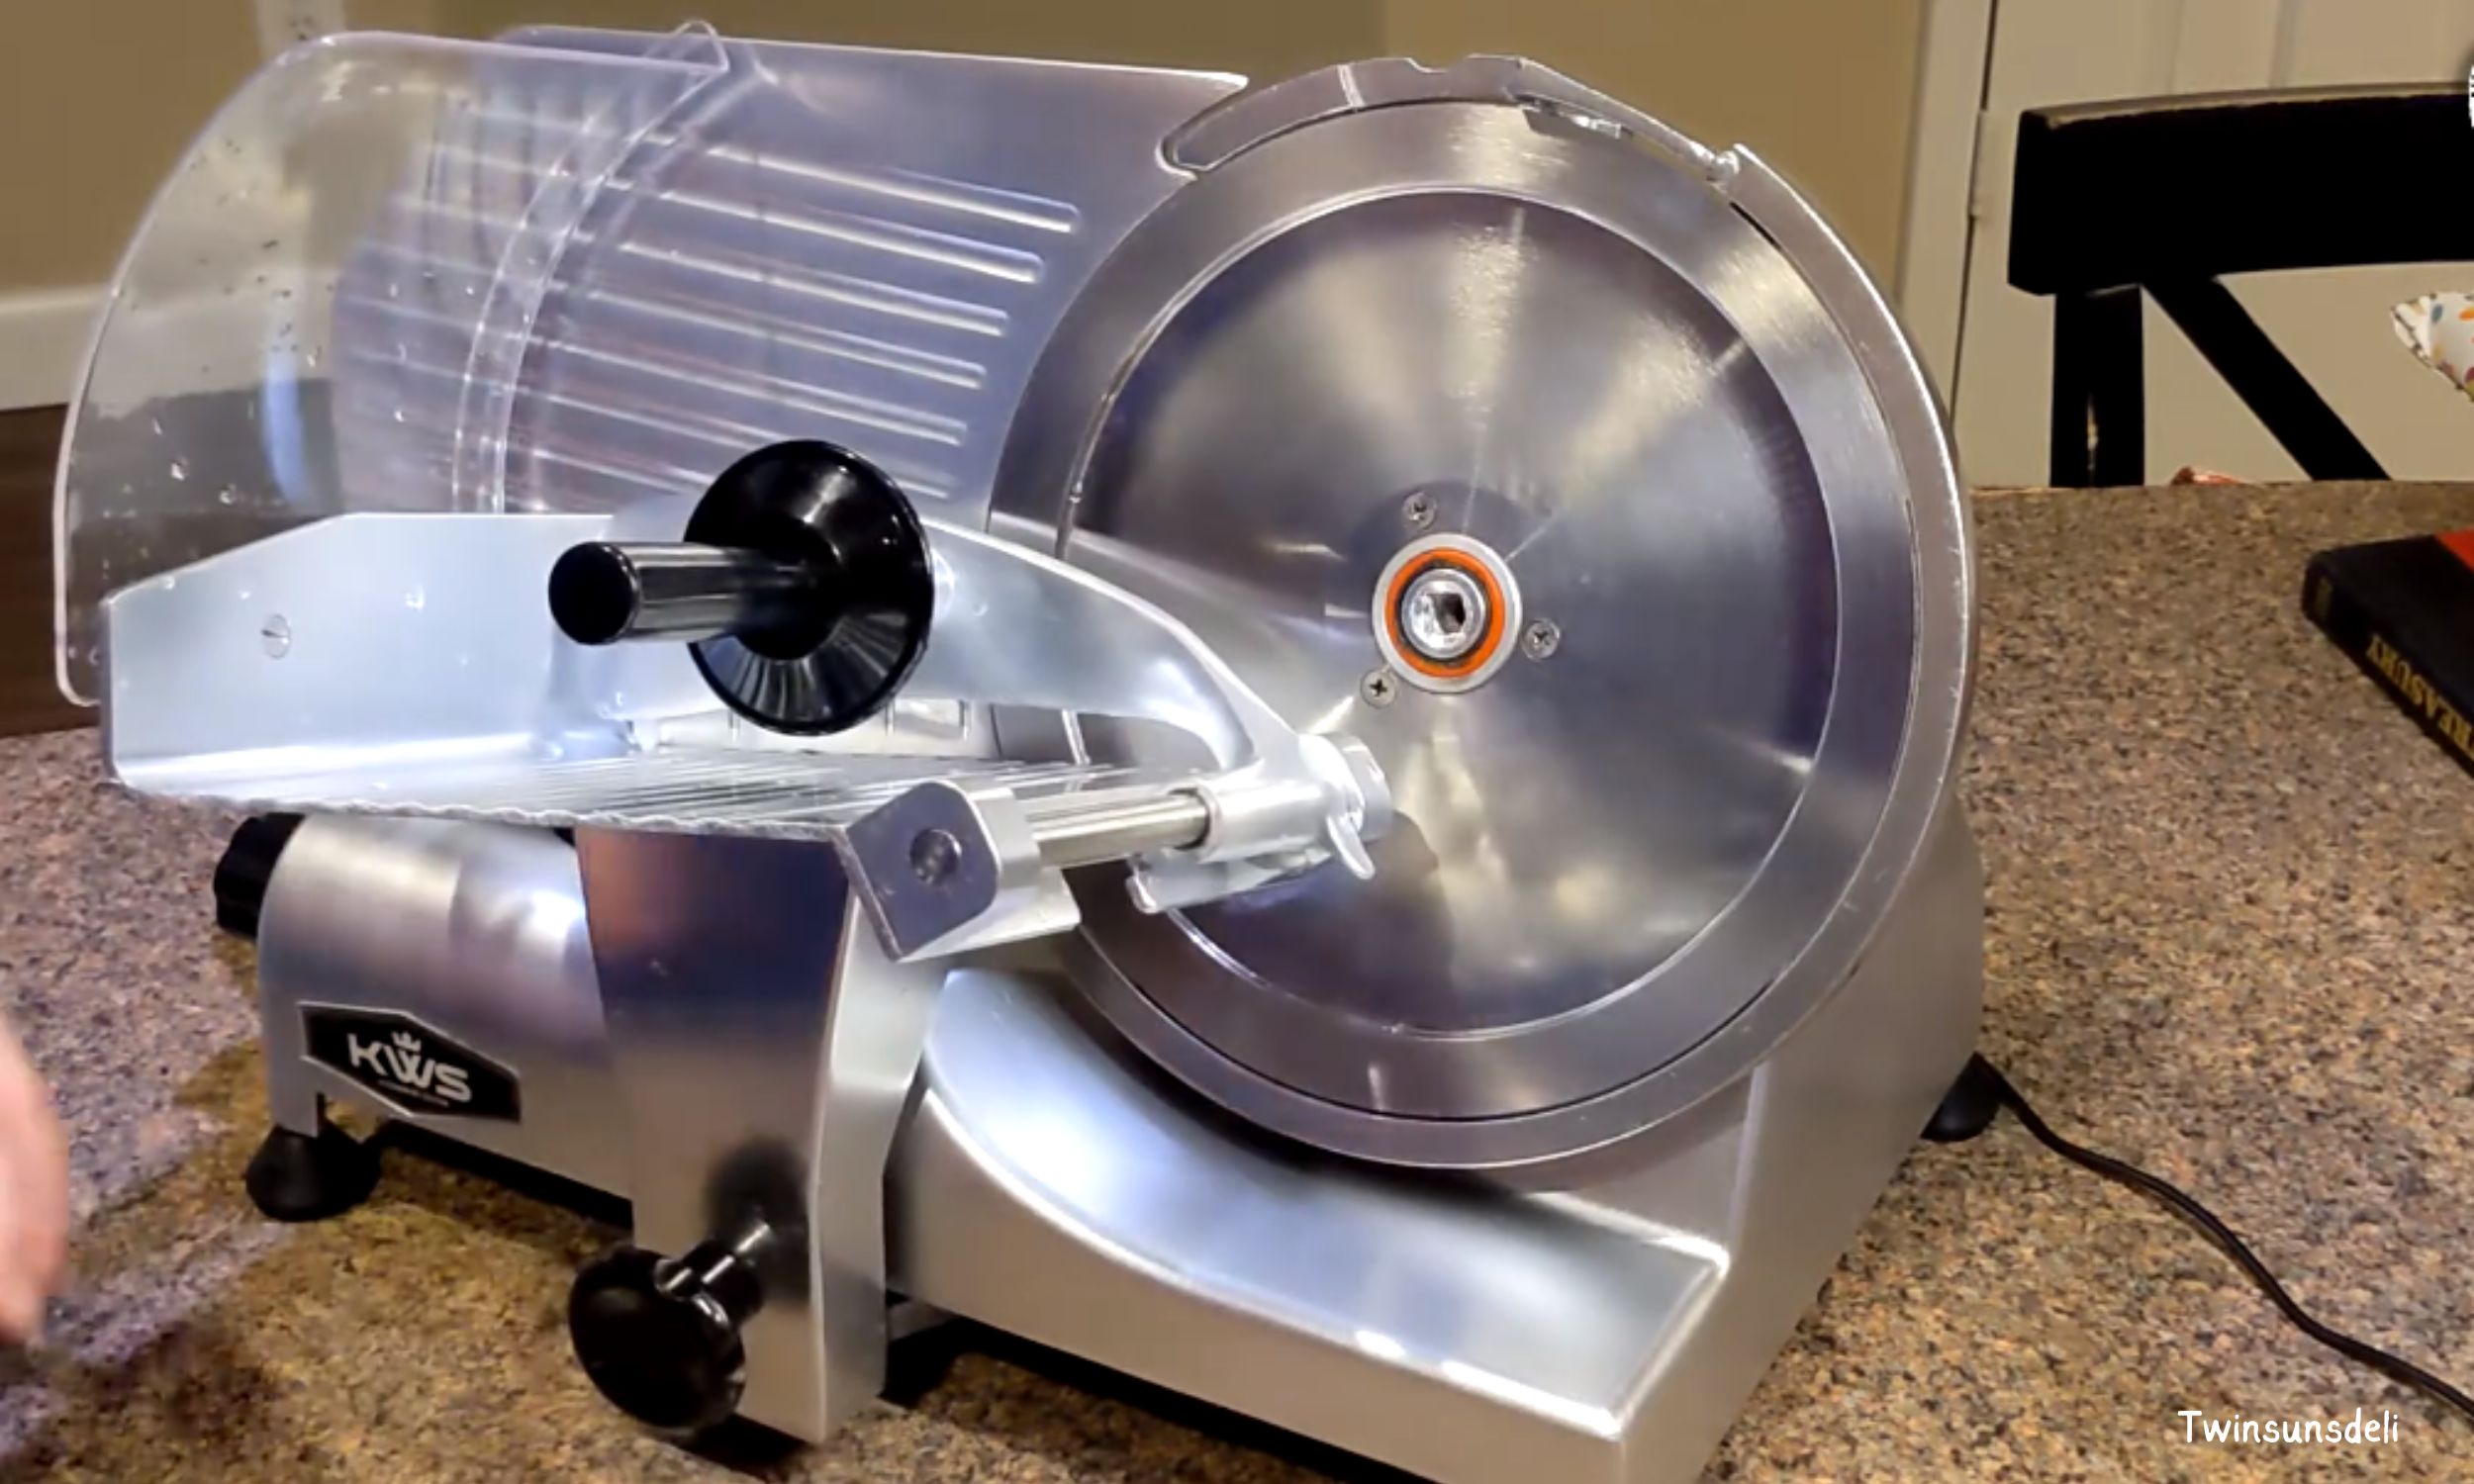 How to sharpen a meat slicer blade